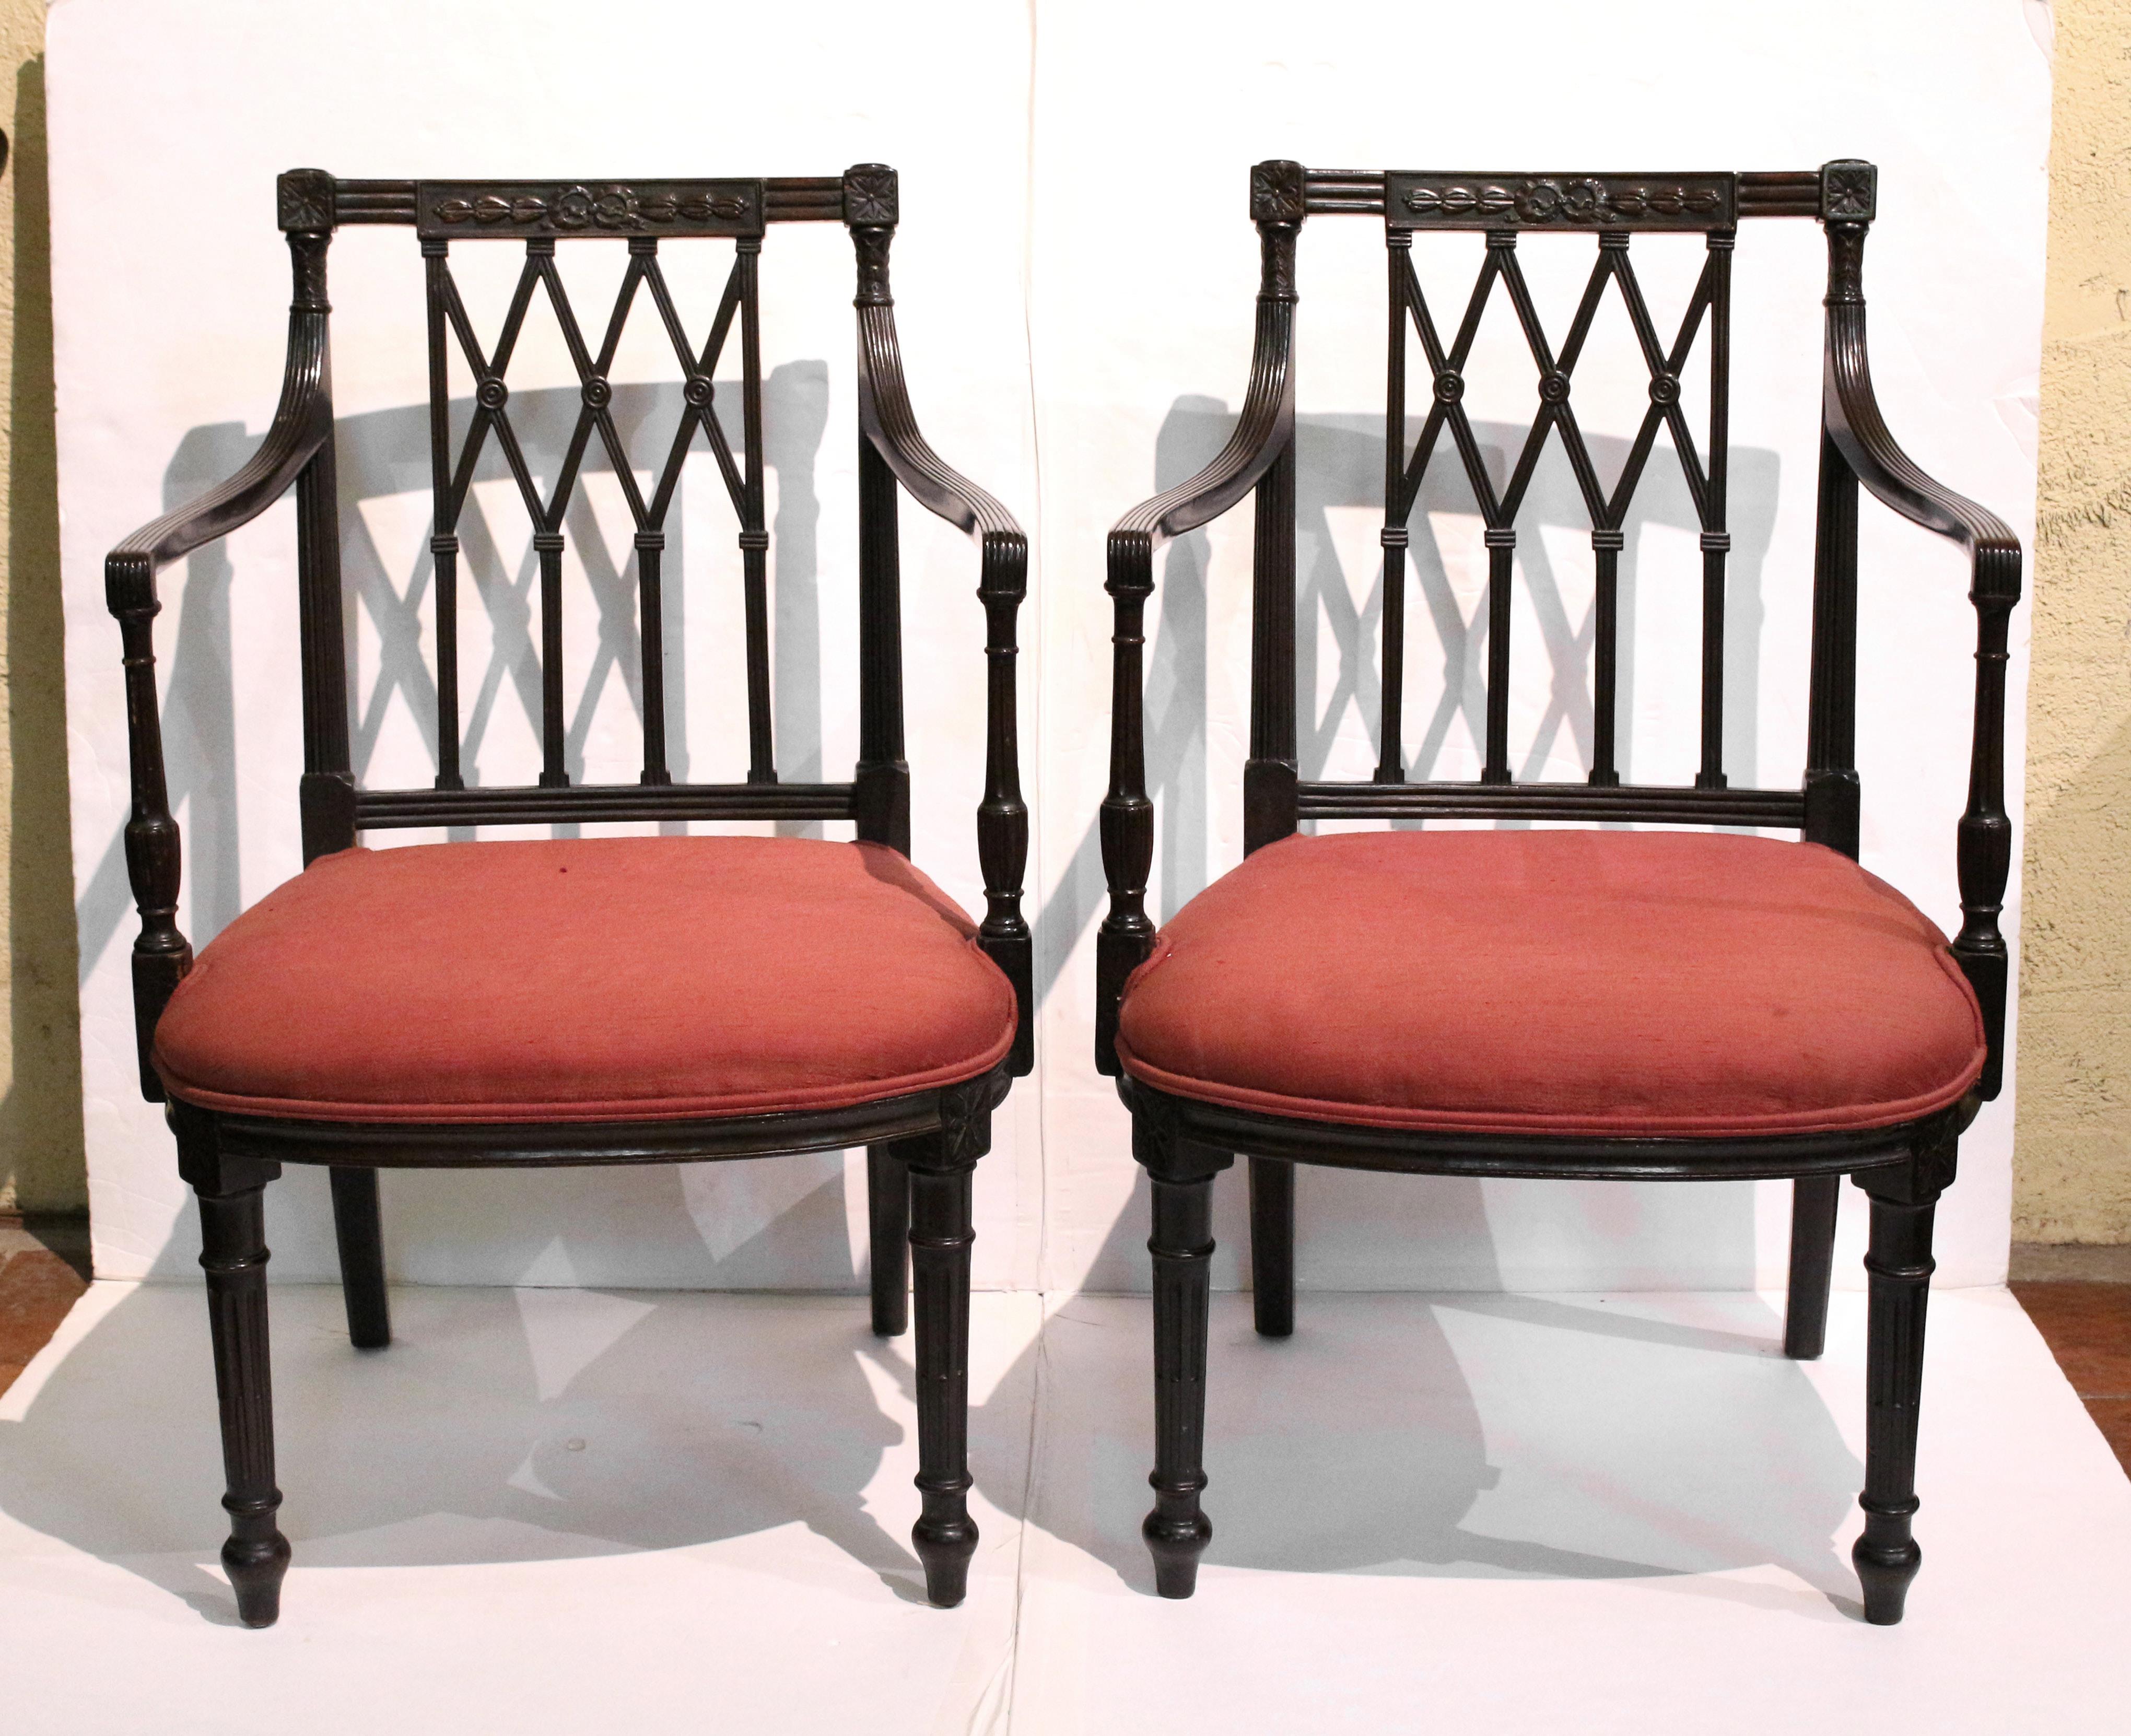 Mid-19th century pair of late Classical arm chairs. English. Mahogany with oak secondary wood. Straight ribbon carved & molded crest rails. Square carved rosettes over the arms to turned acanthus carving to reeded outswept arms & uprights to